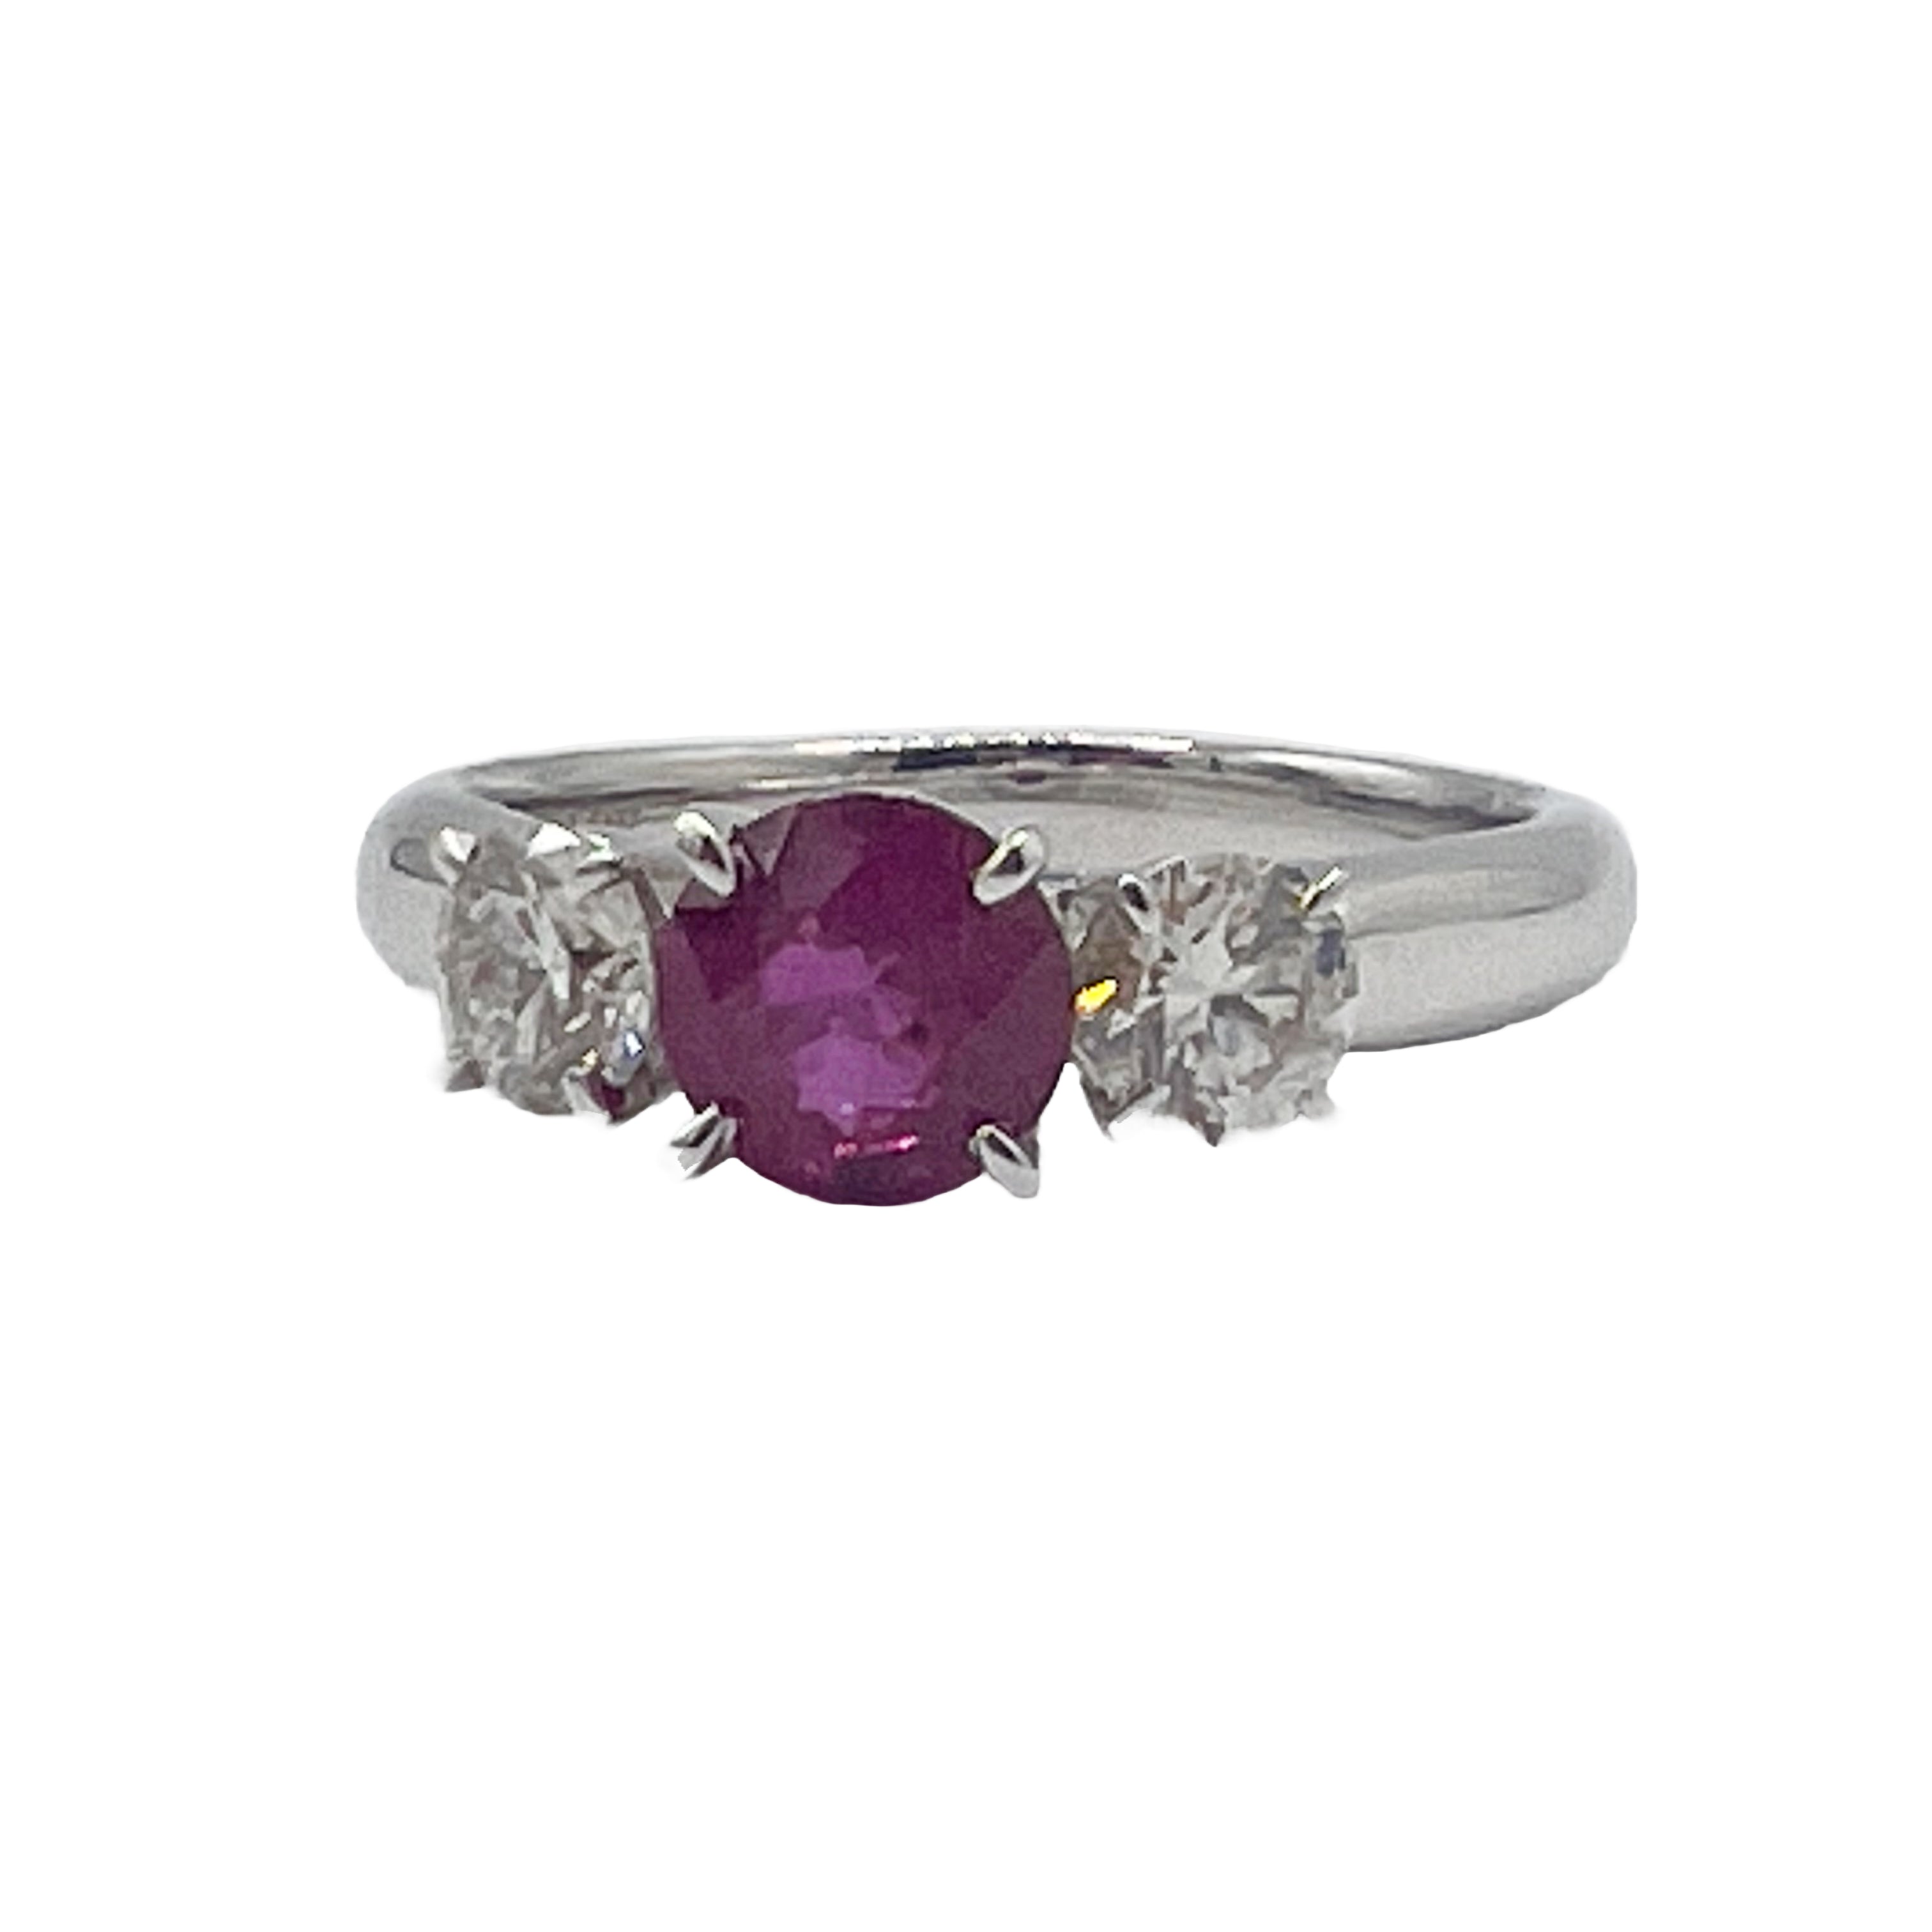 Ring 18KW/3.7G 1RUBY-0.83CT 2RD-0.62CT